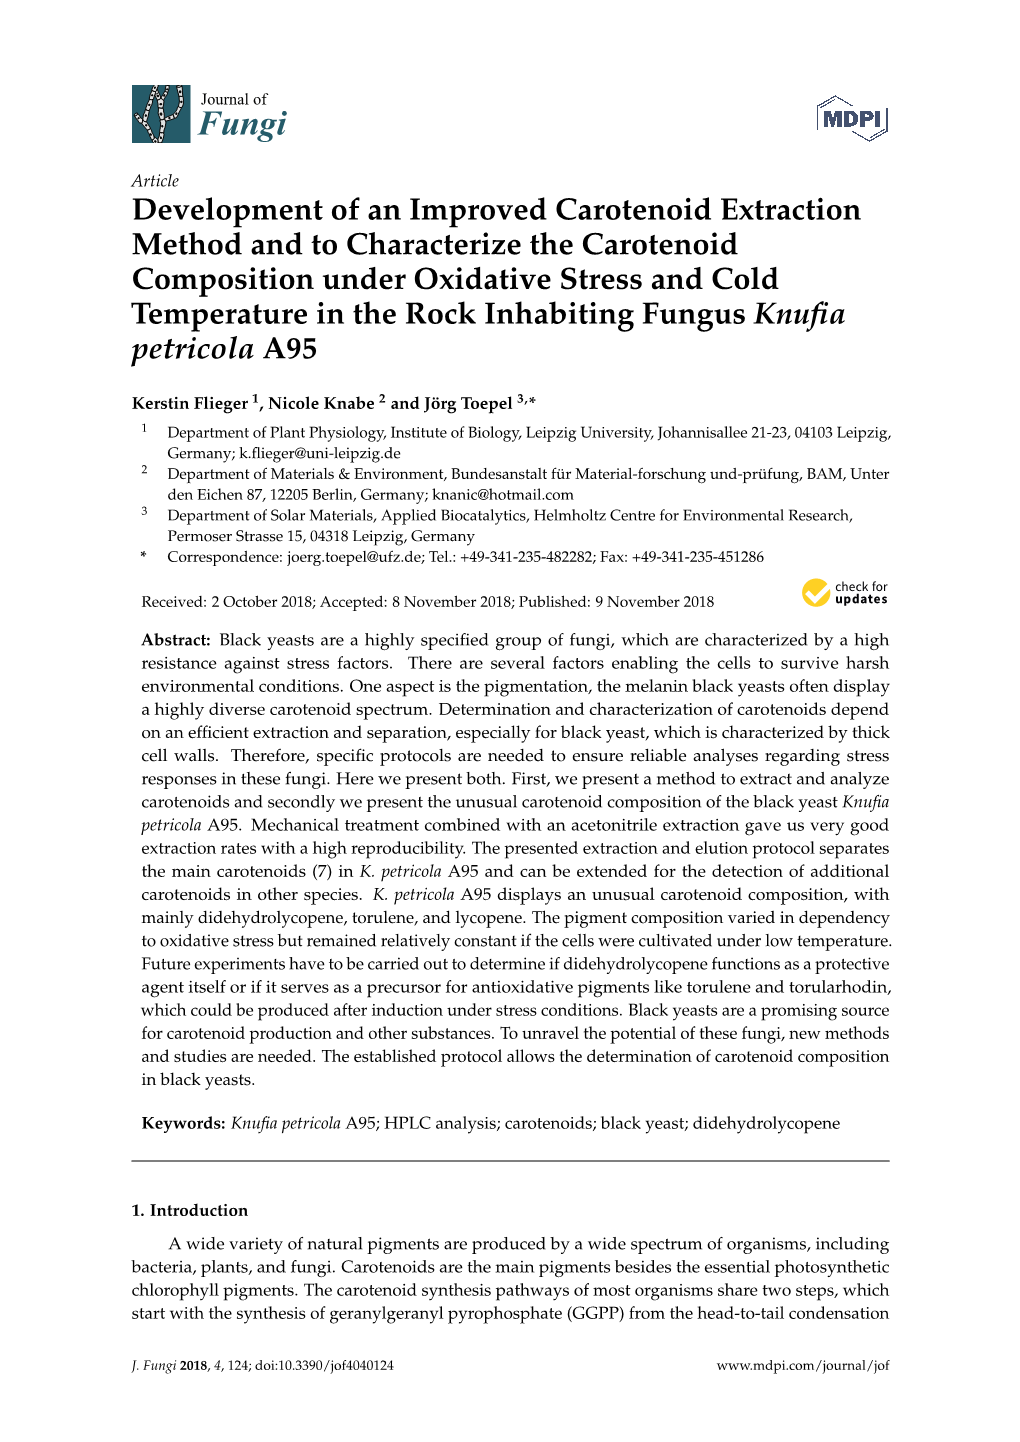 Development of an Improved Carotenoid Extraction Method And